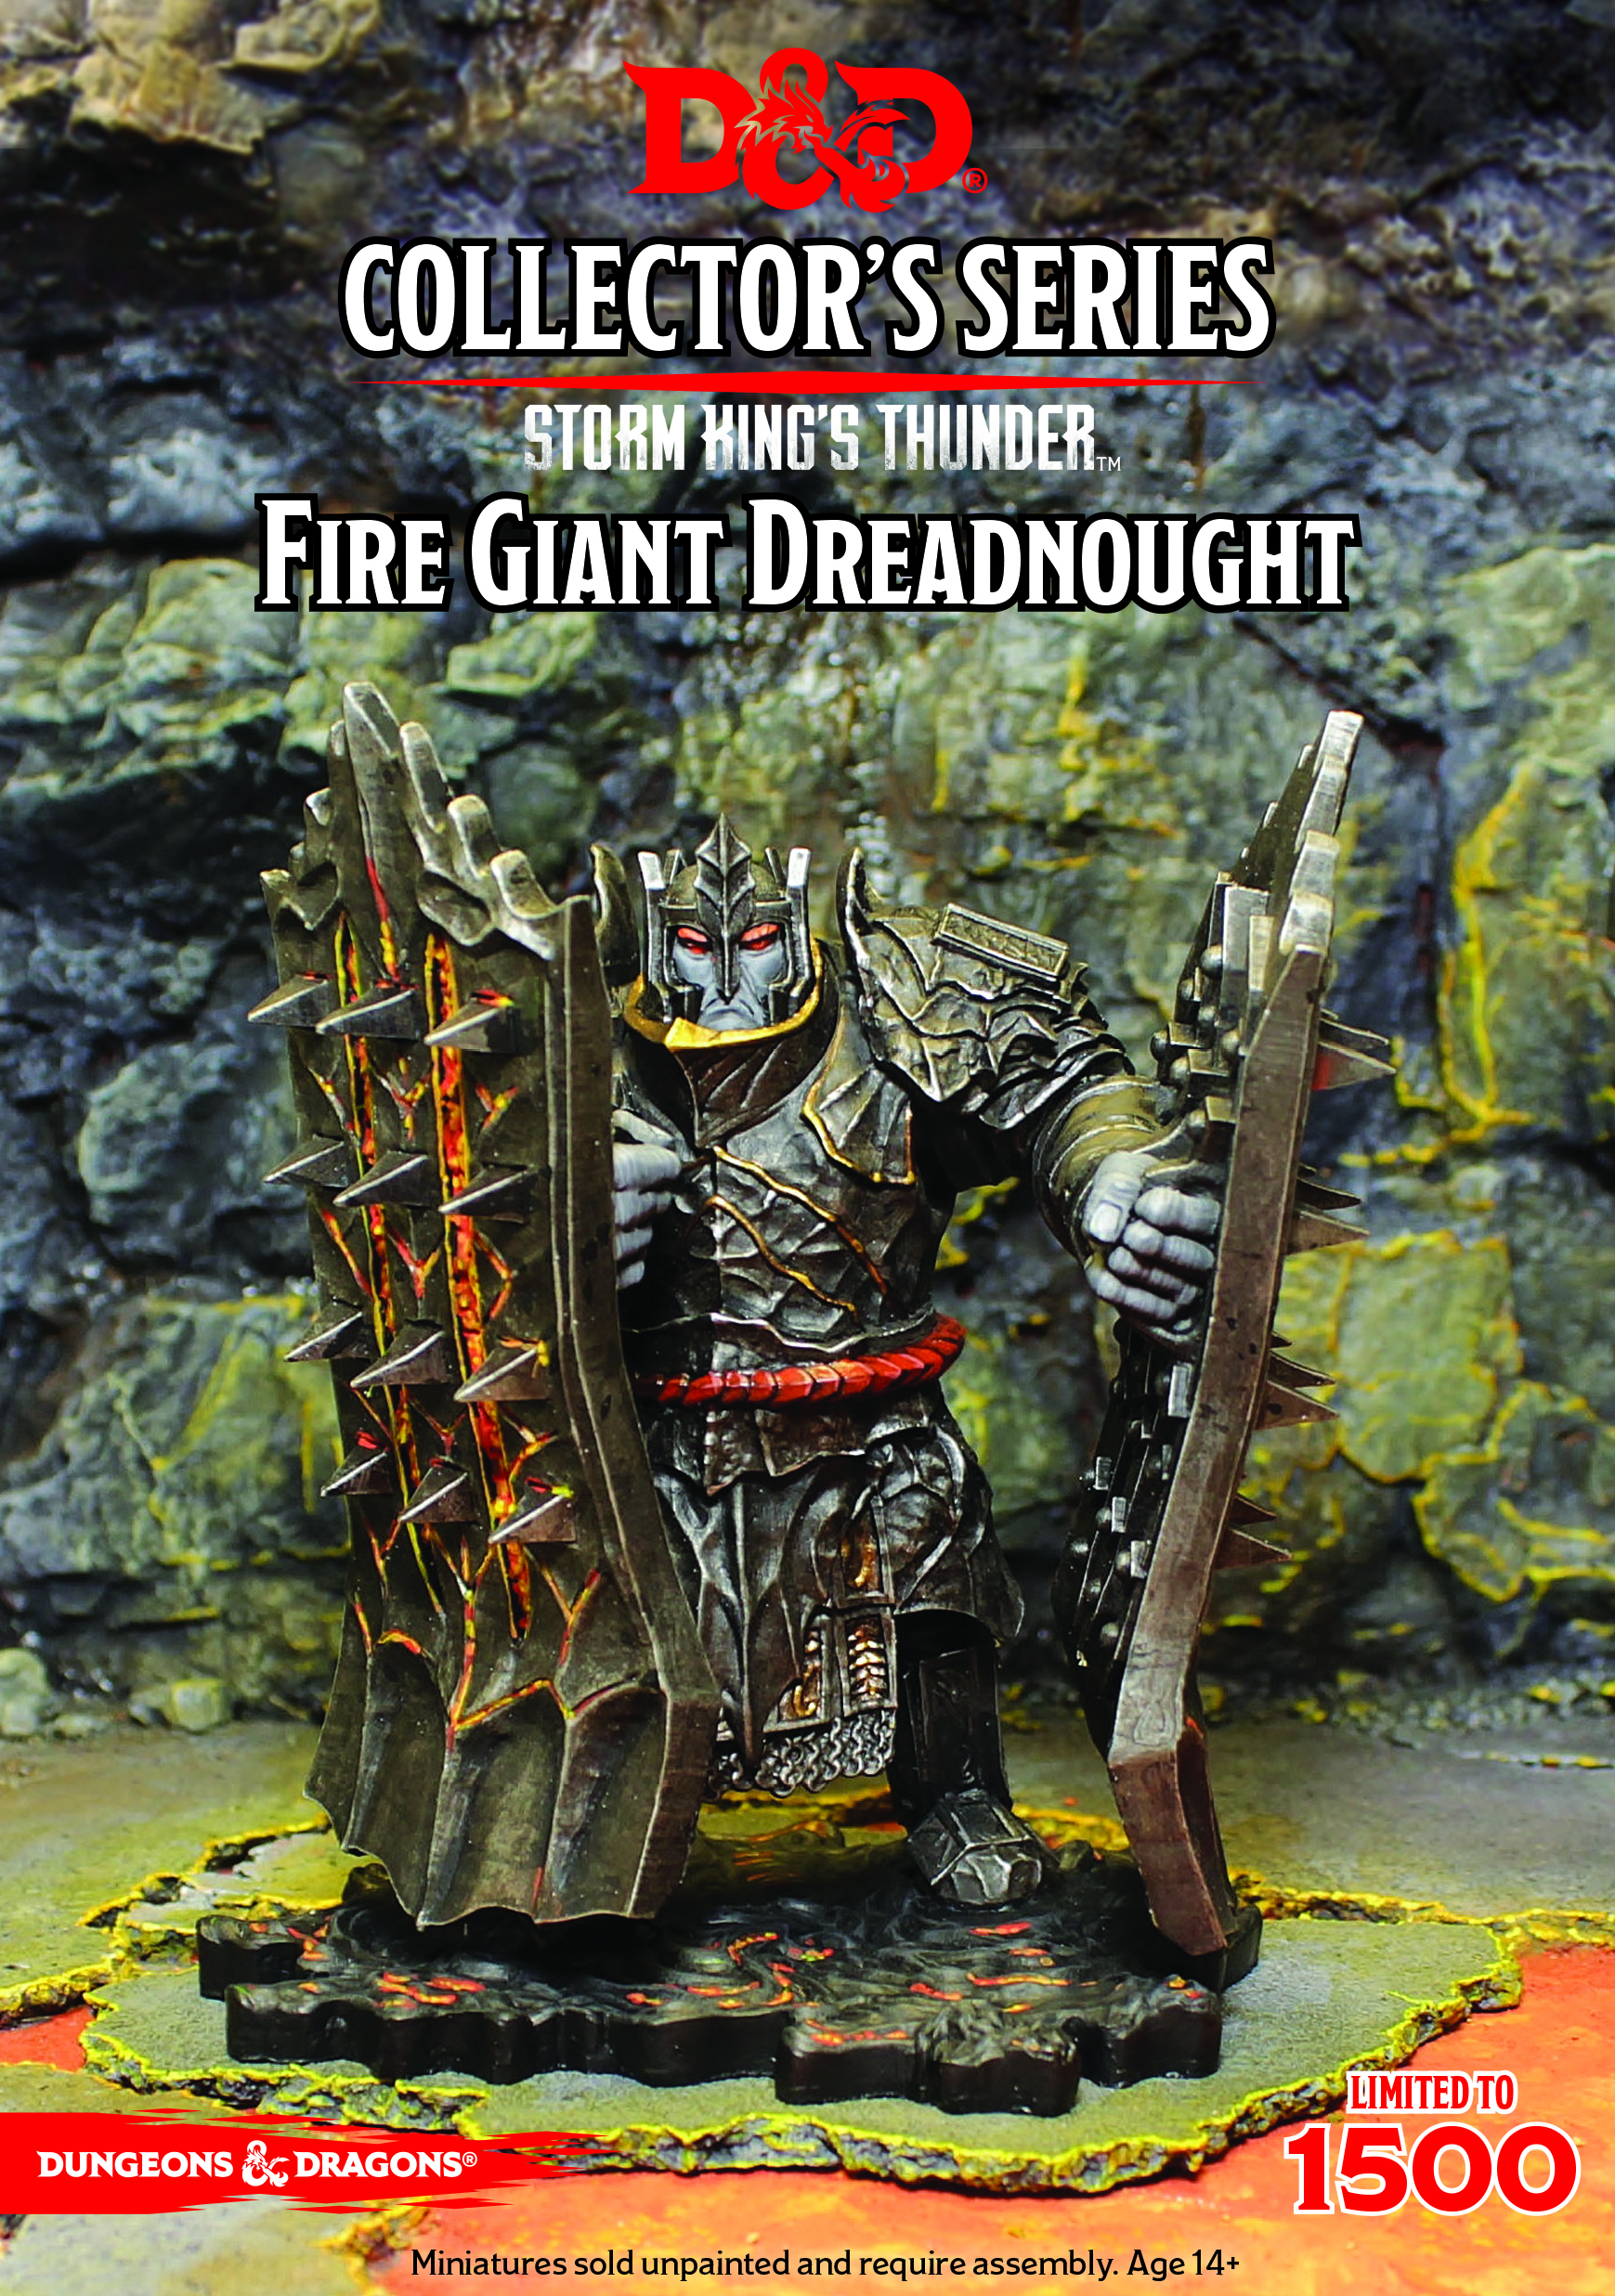 Fire Giant Dreadnought